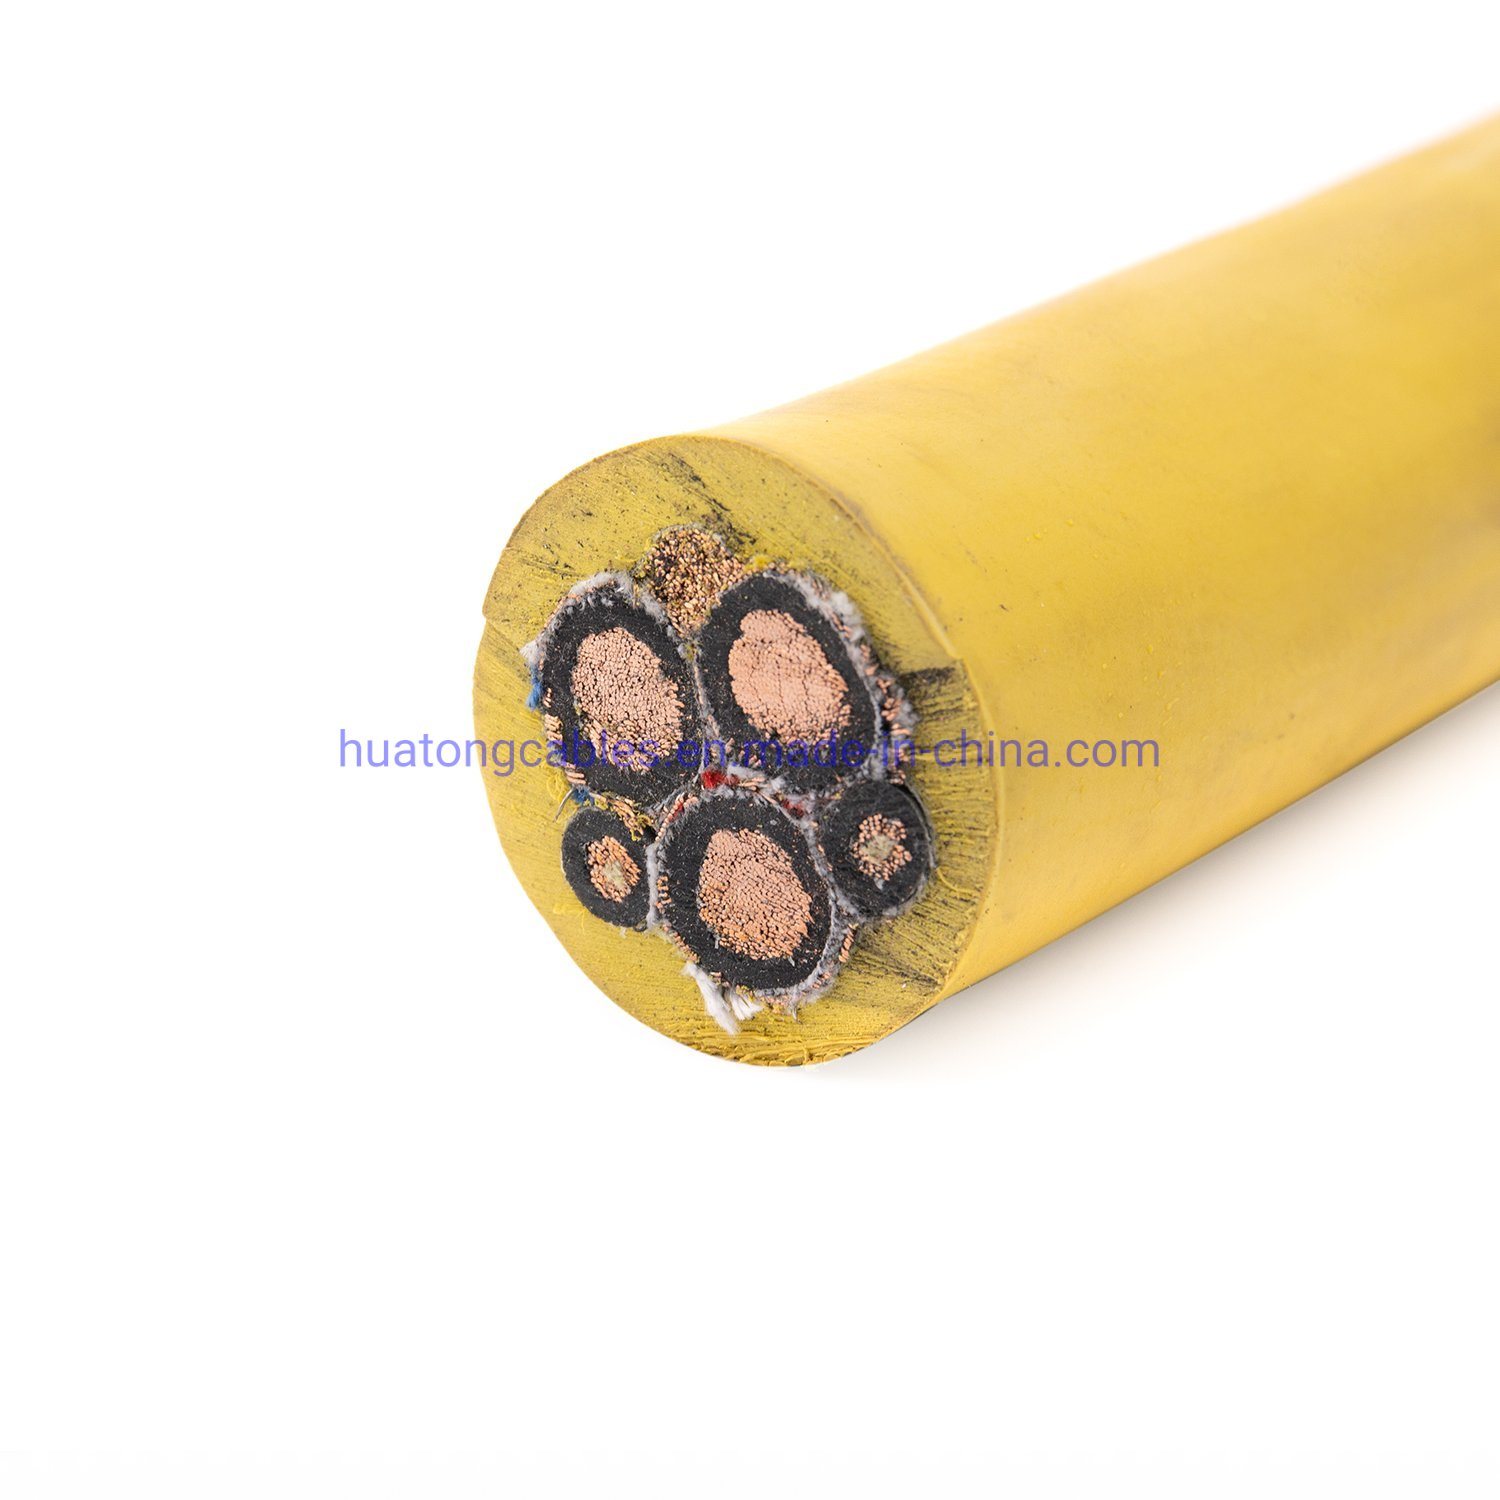 Type 61 Type 61A Type 61b Type 61 Ecc Rubber Flexible Trailing Cables